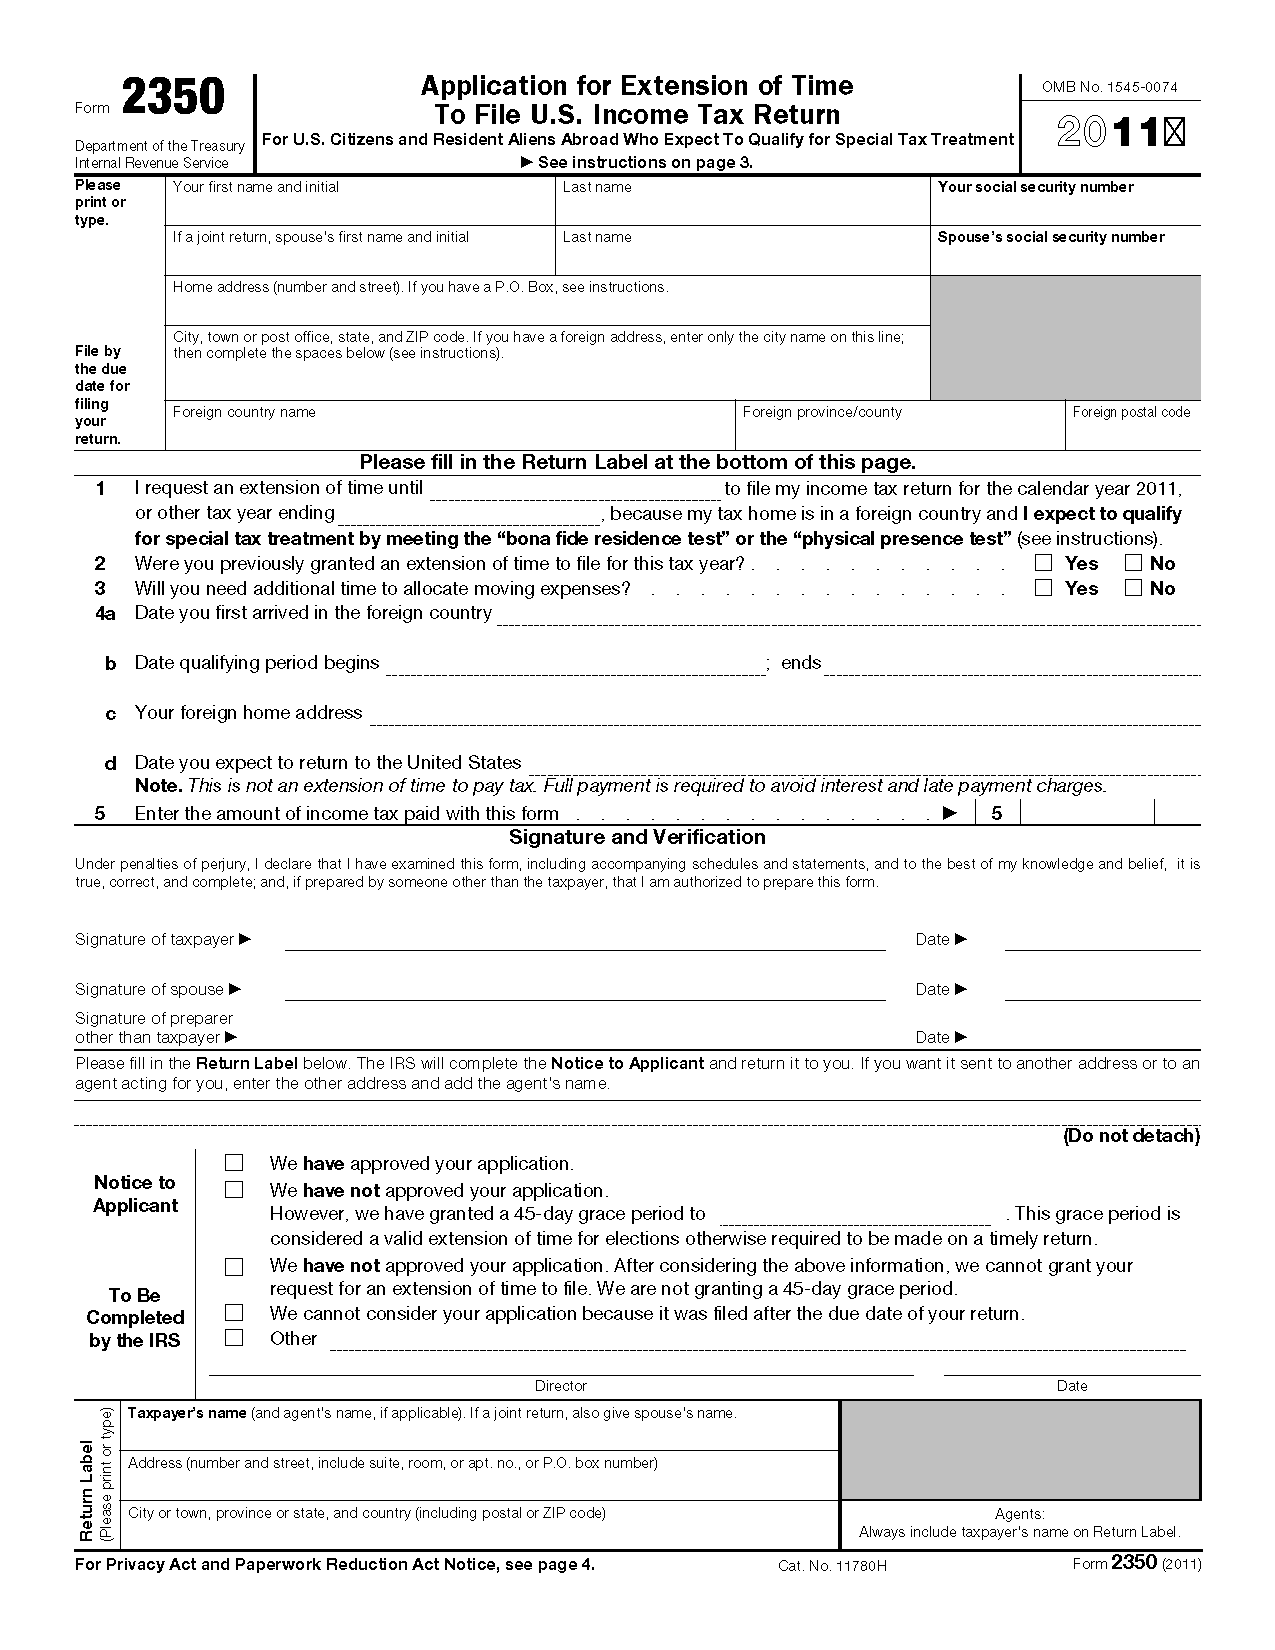 Form 2350 Application for Extension of Time to File U.S. Income Tax Return